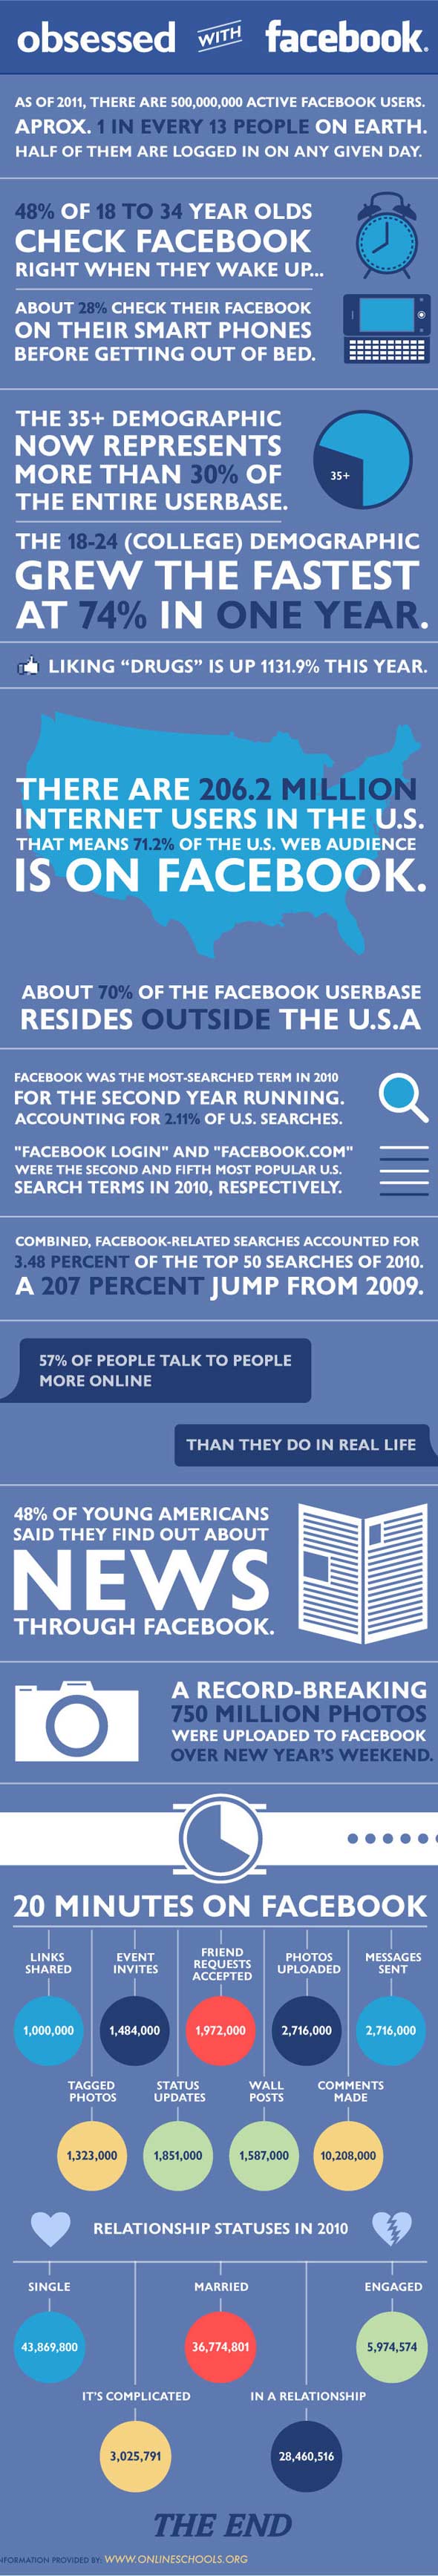 Facebook: used by 1 in 13 of the world's population [infographic]